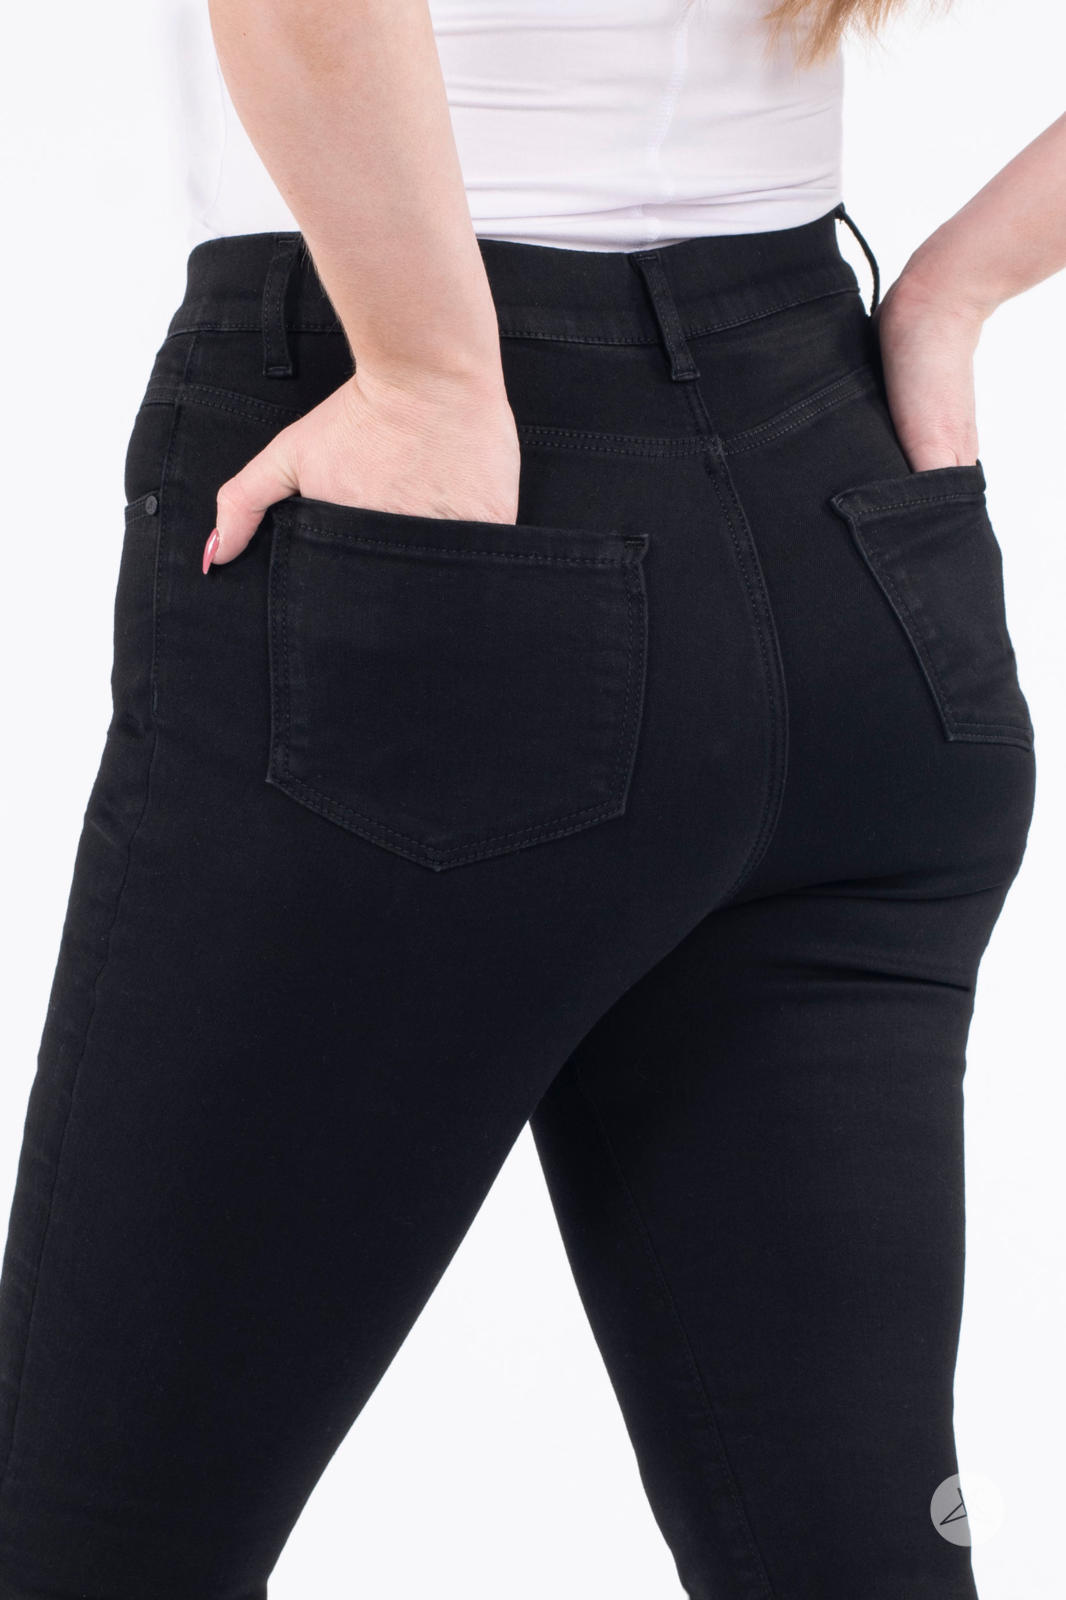 Black Jeggings with Pockets